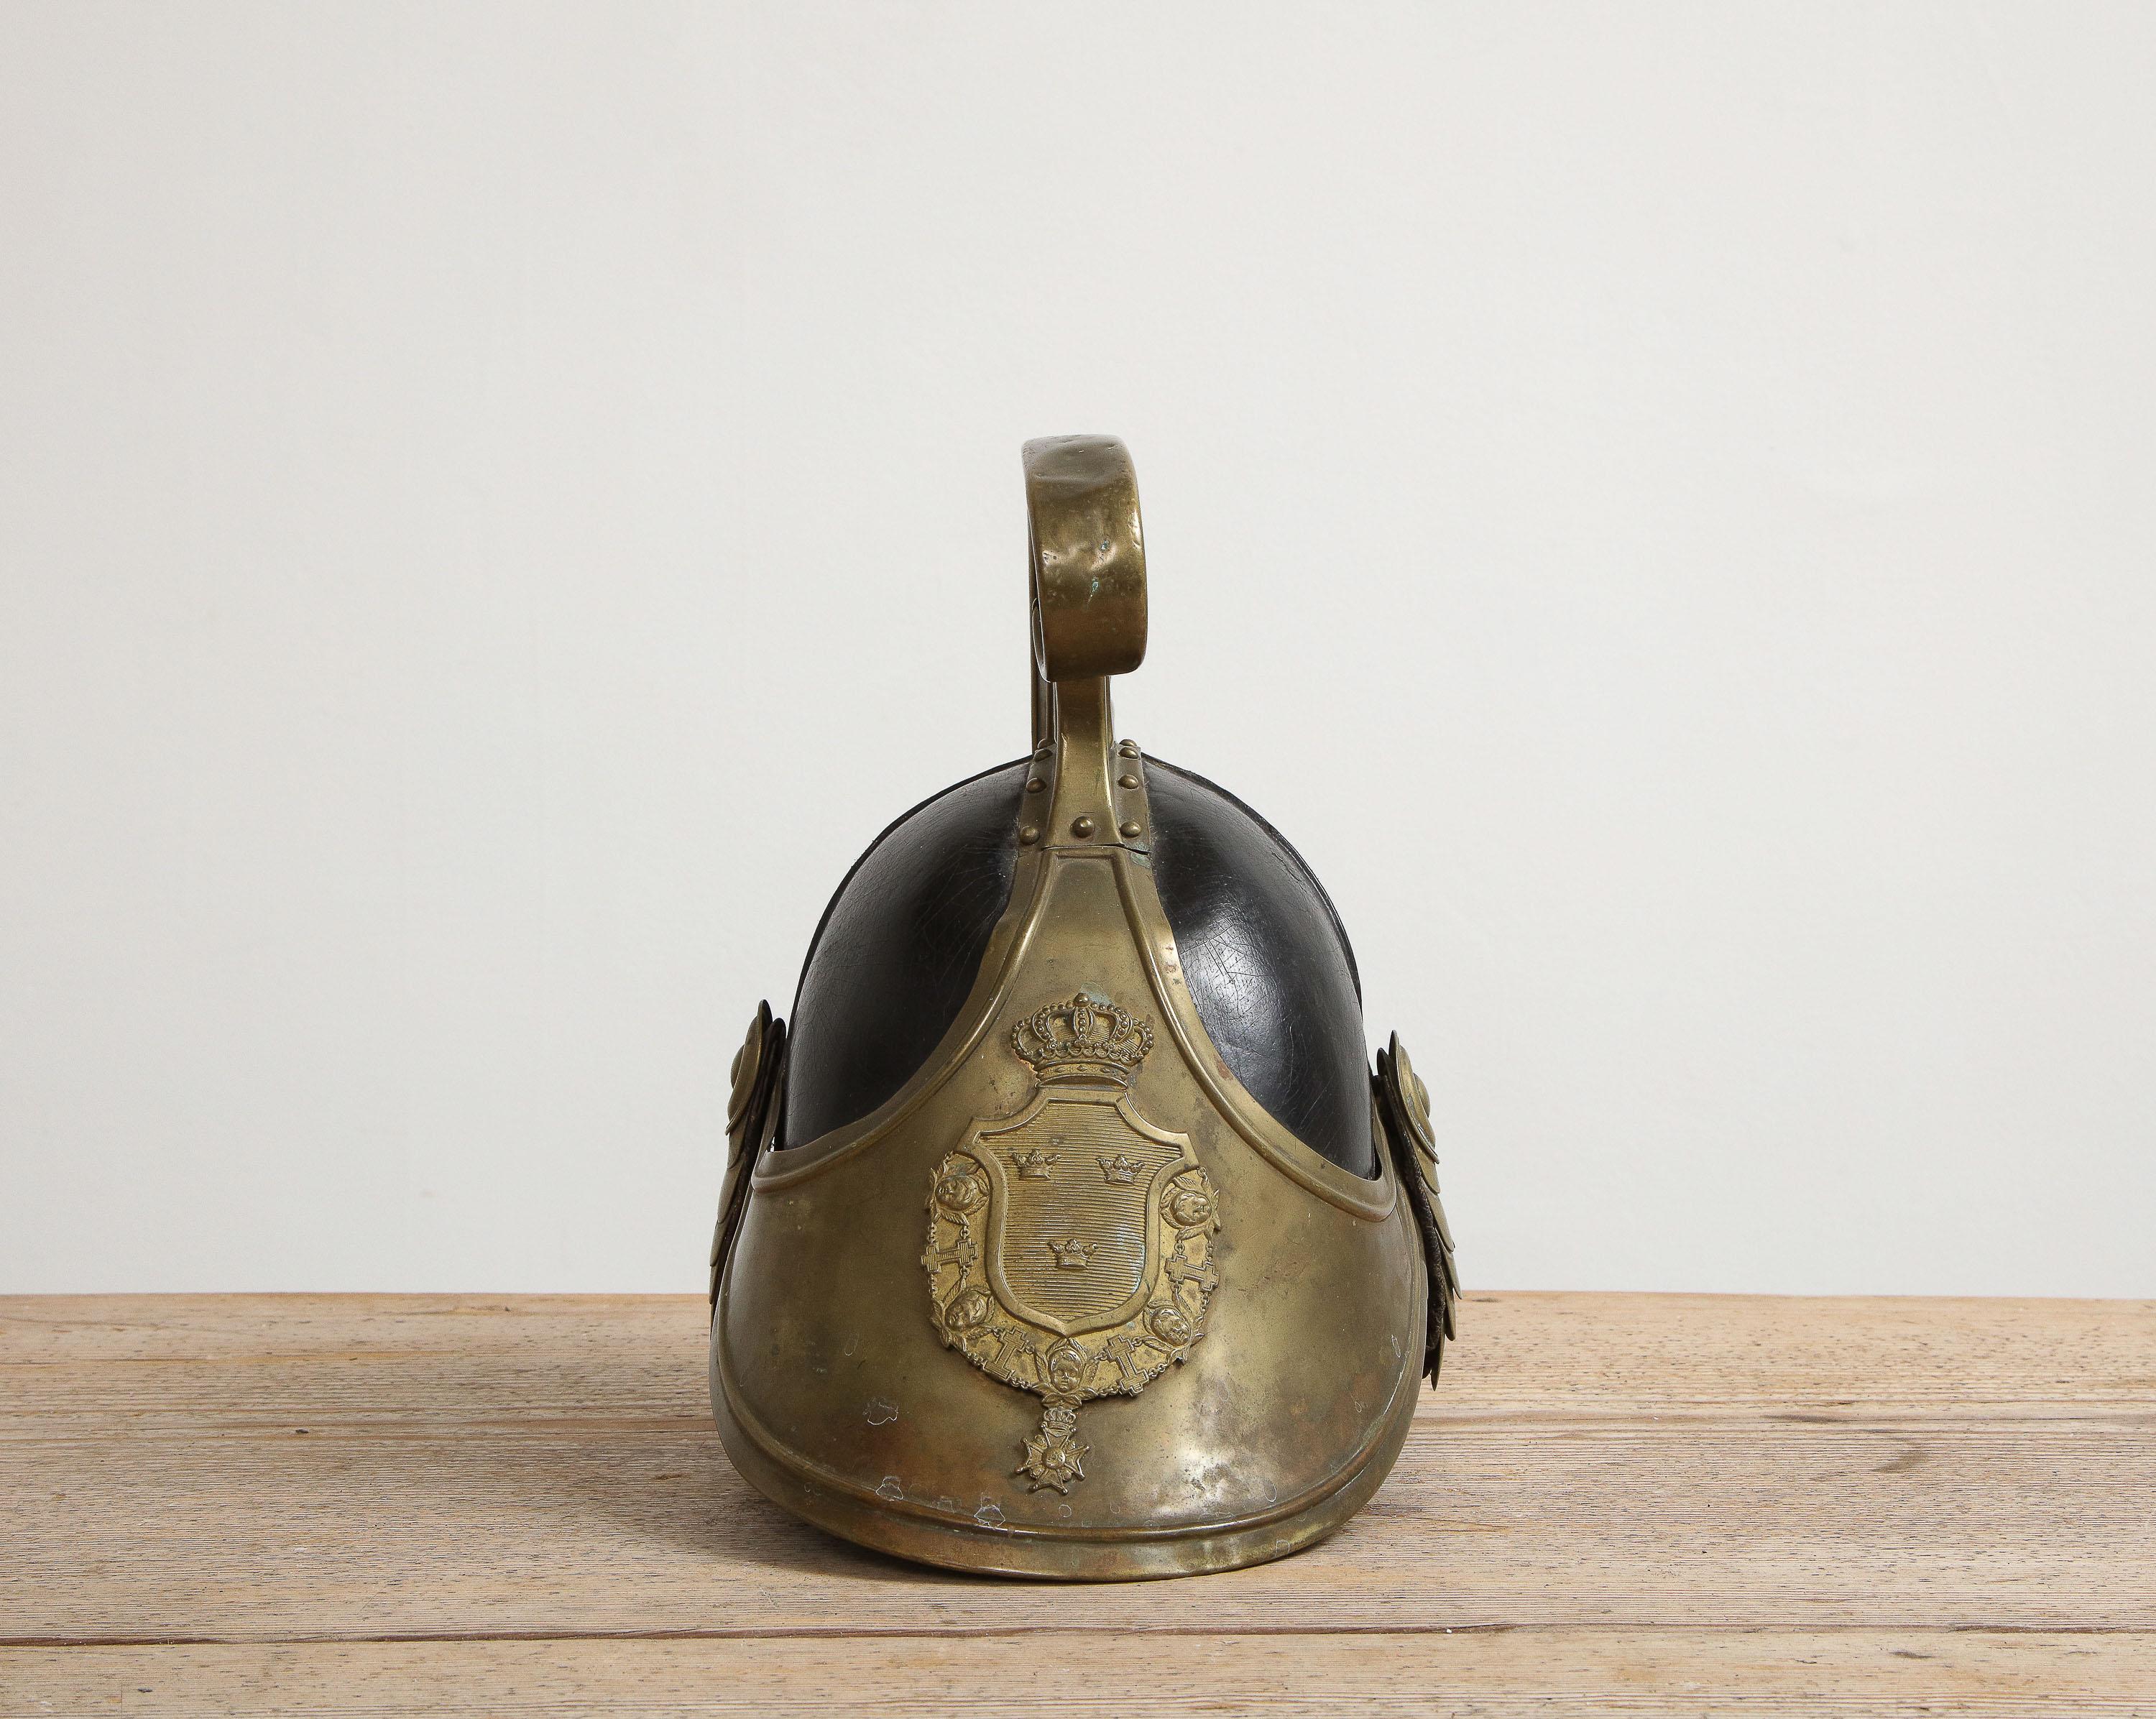 A Swedish dragoon helmet, equipment utilized by a member of a ceremonial cavalry regiment, origin: Sweden, circa 1800, all original leather and brass plate 

This helmet is adorned with a brass plate containing a coat of arms with the national